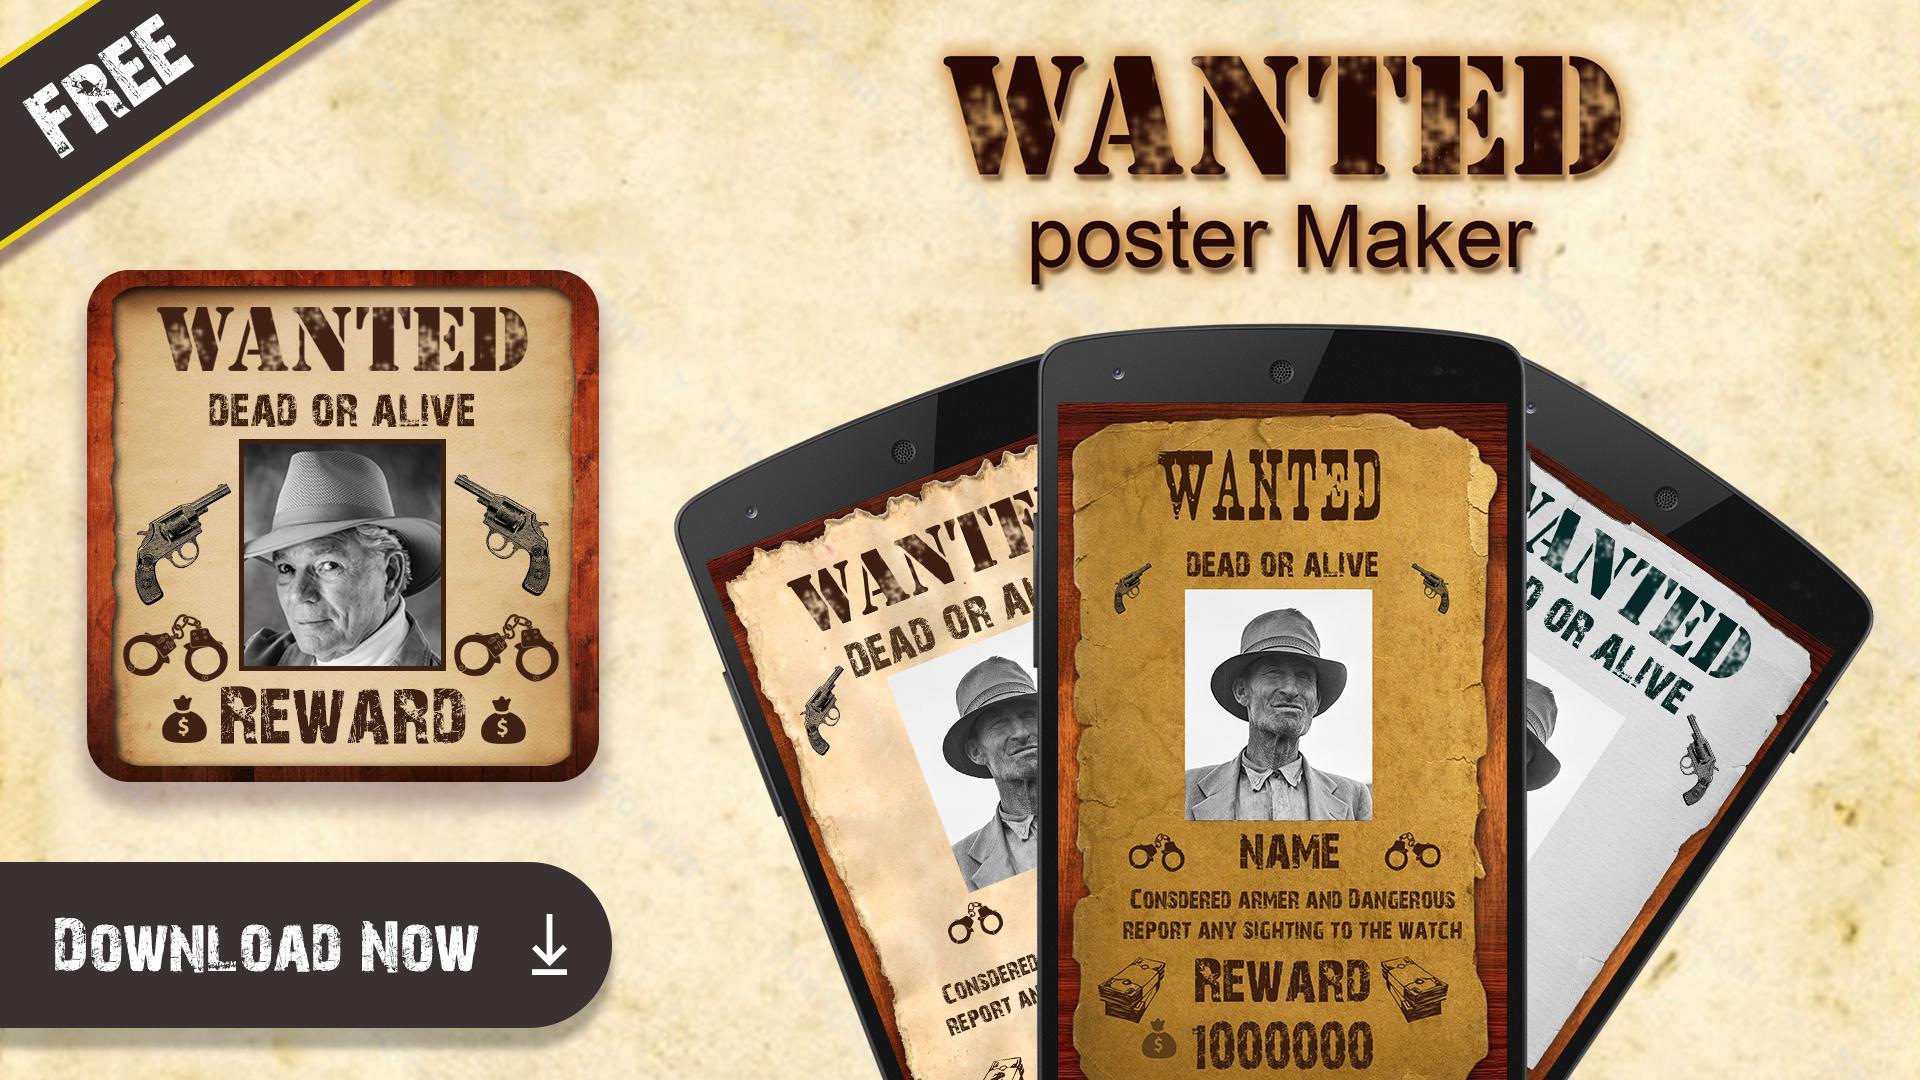 Wanted death. Постер вантед. Постер wanted. Wanted Dead or Alive poster.